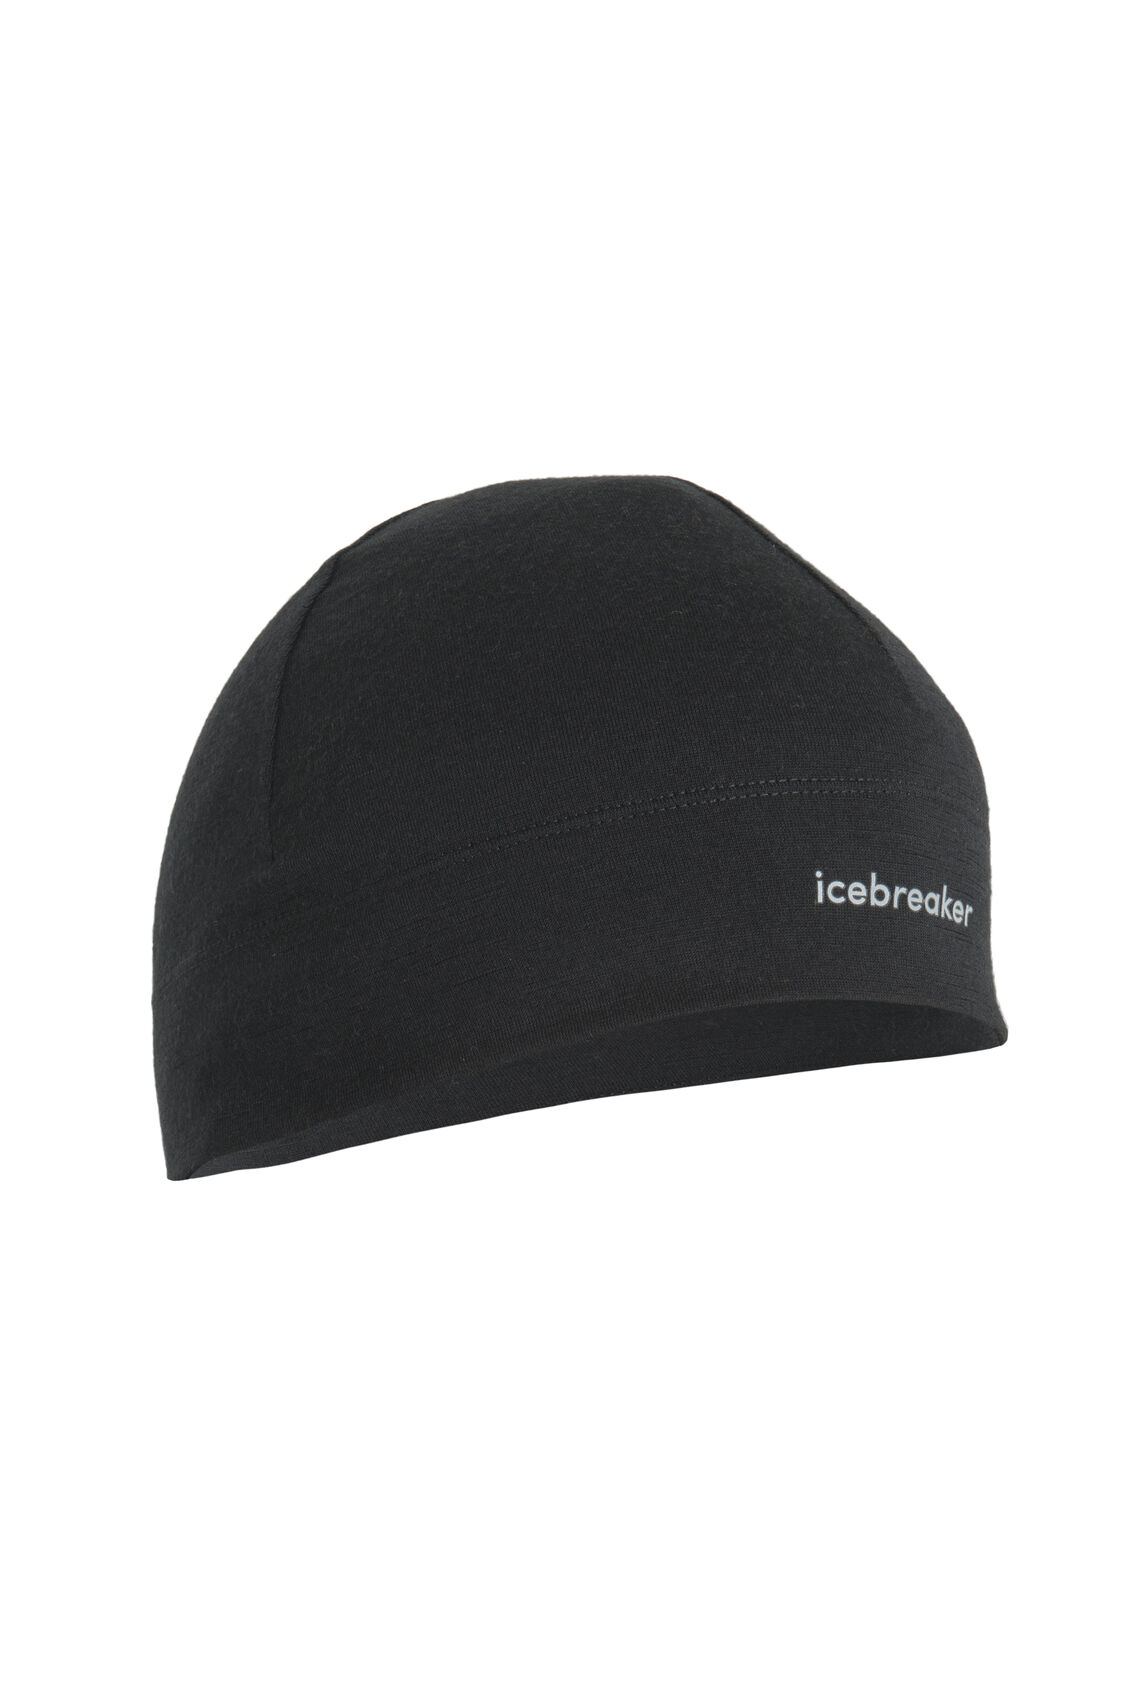 Womens Merino 200 Oasis Beanie A midweight merino wool hat for running, hiking and active winter days made with our best-selling jersey merino fabric, the 200 Oasis Beanie insulates and breathes when you're on the move.